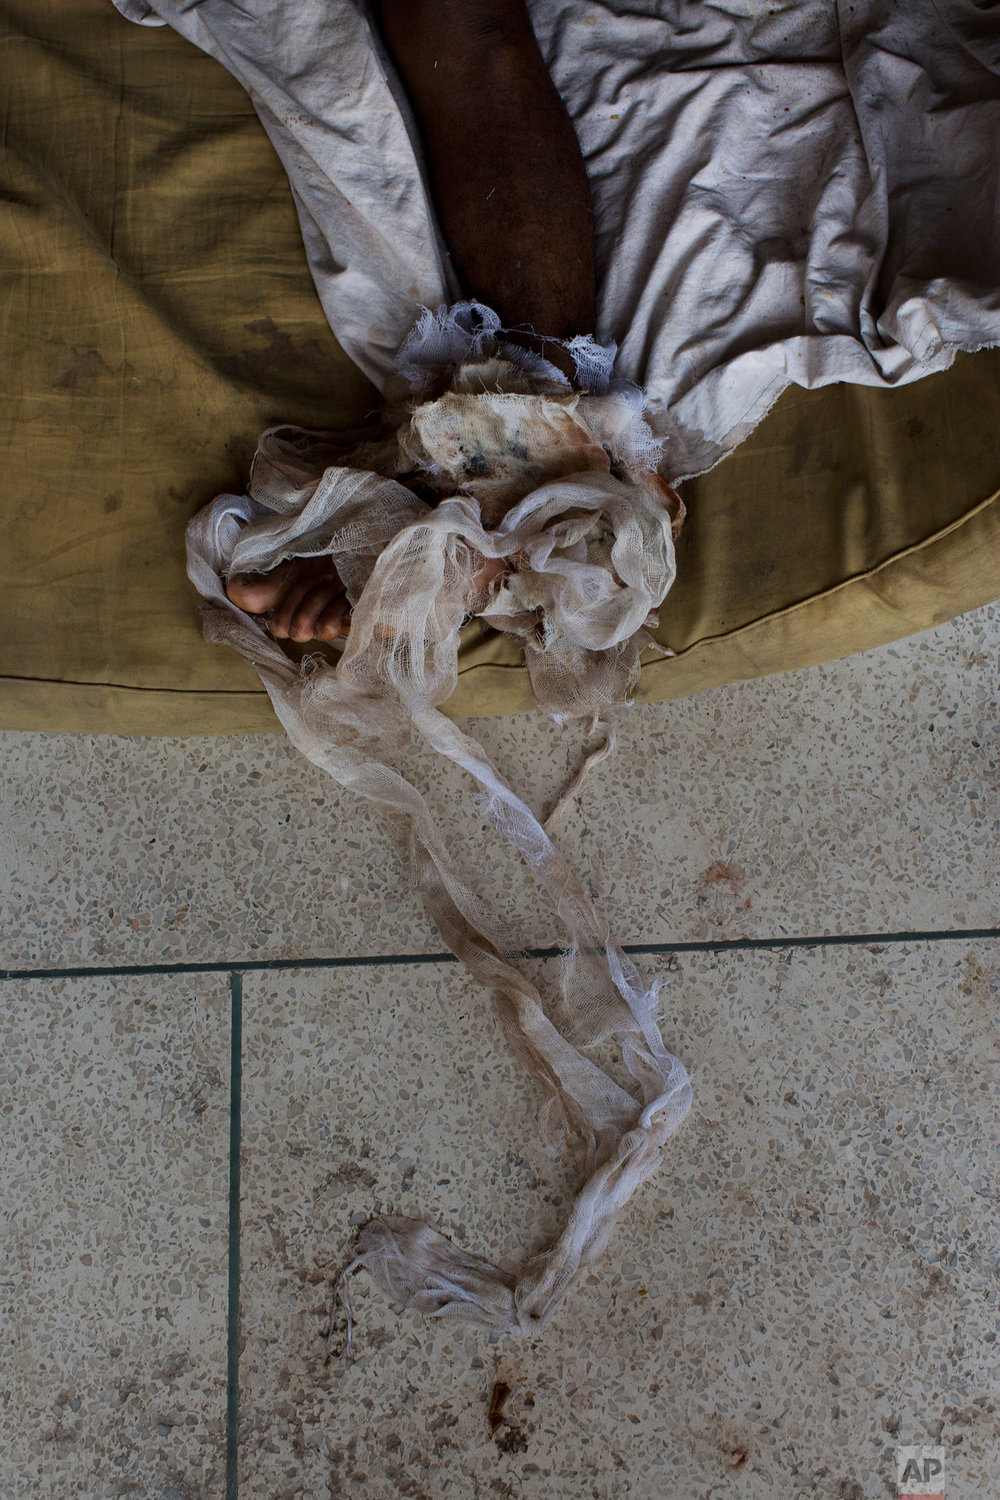 EDS NOTE GRAPHIC CONTENT - Rohingya men Abdul Karim lies on the floor at Sadar Hospital in Cox's Bazar, Bangladesh, Sunday, Sept. 10, 2017. Karim sustained severely bullet injuries on his left foot and chest when Myanmar monks and soldiers attacked his village. (AP Photo/Bernat Armangue)